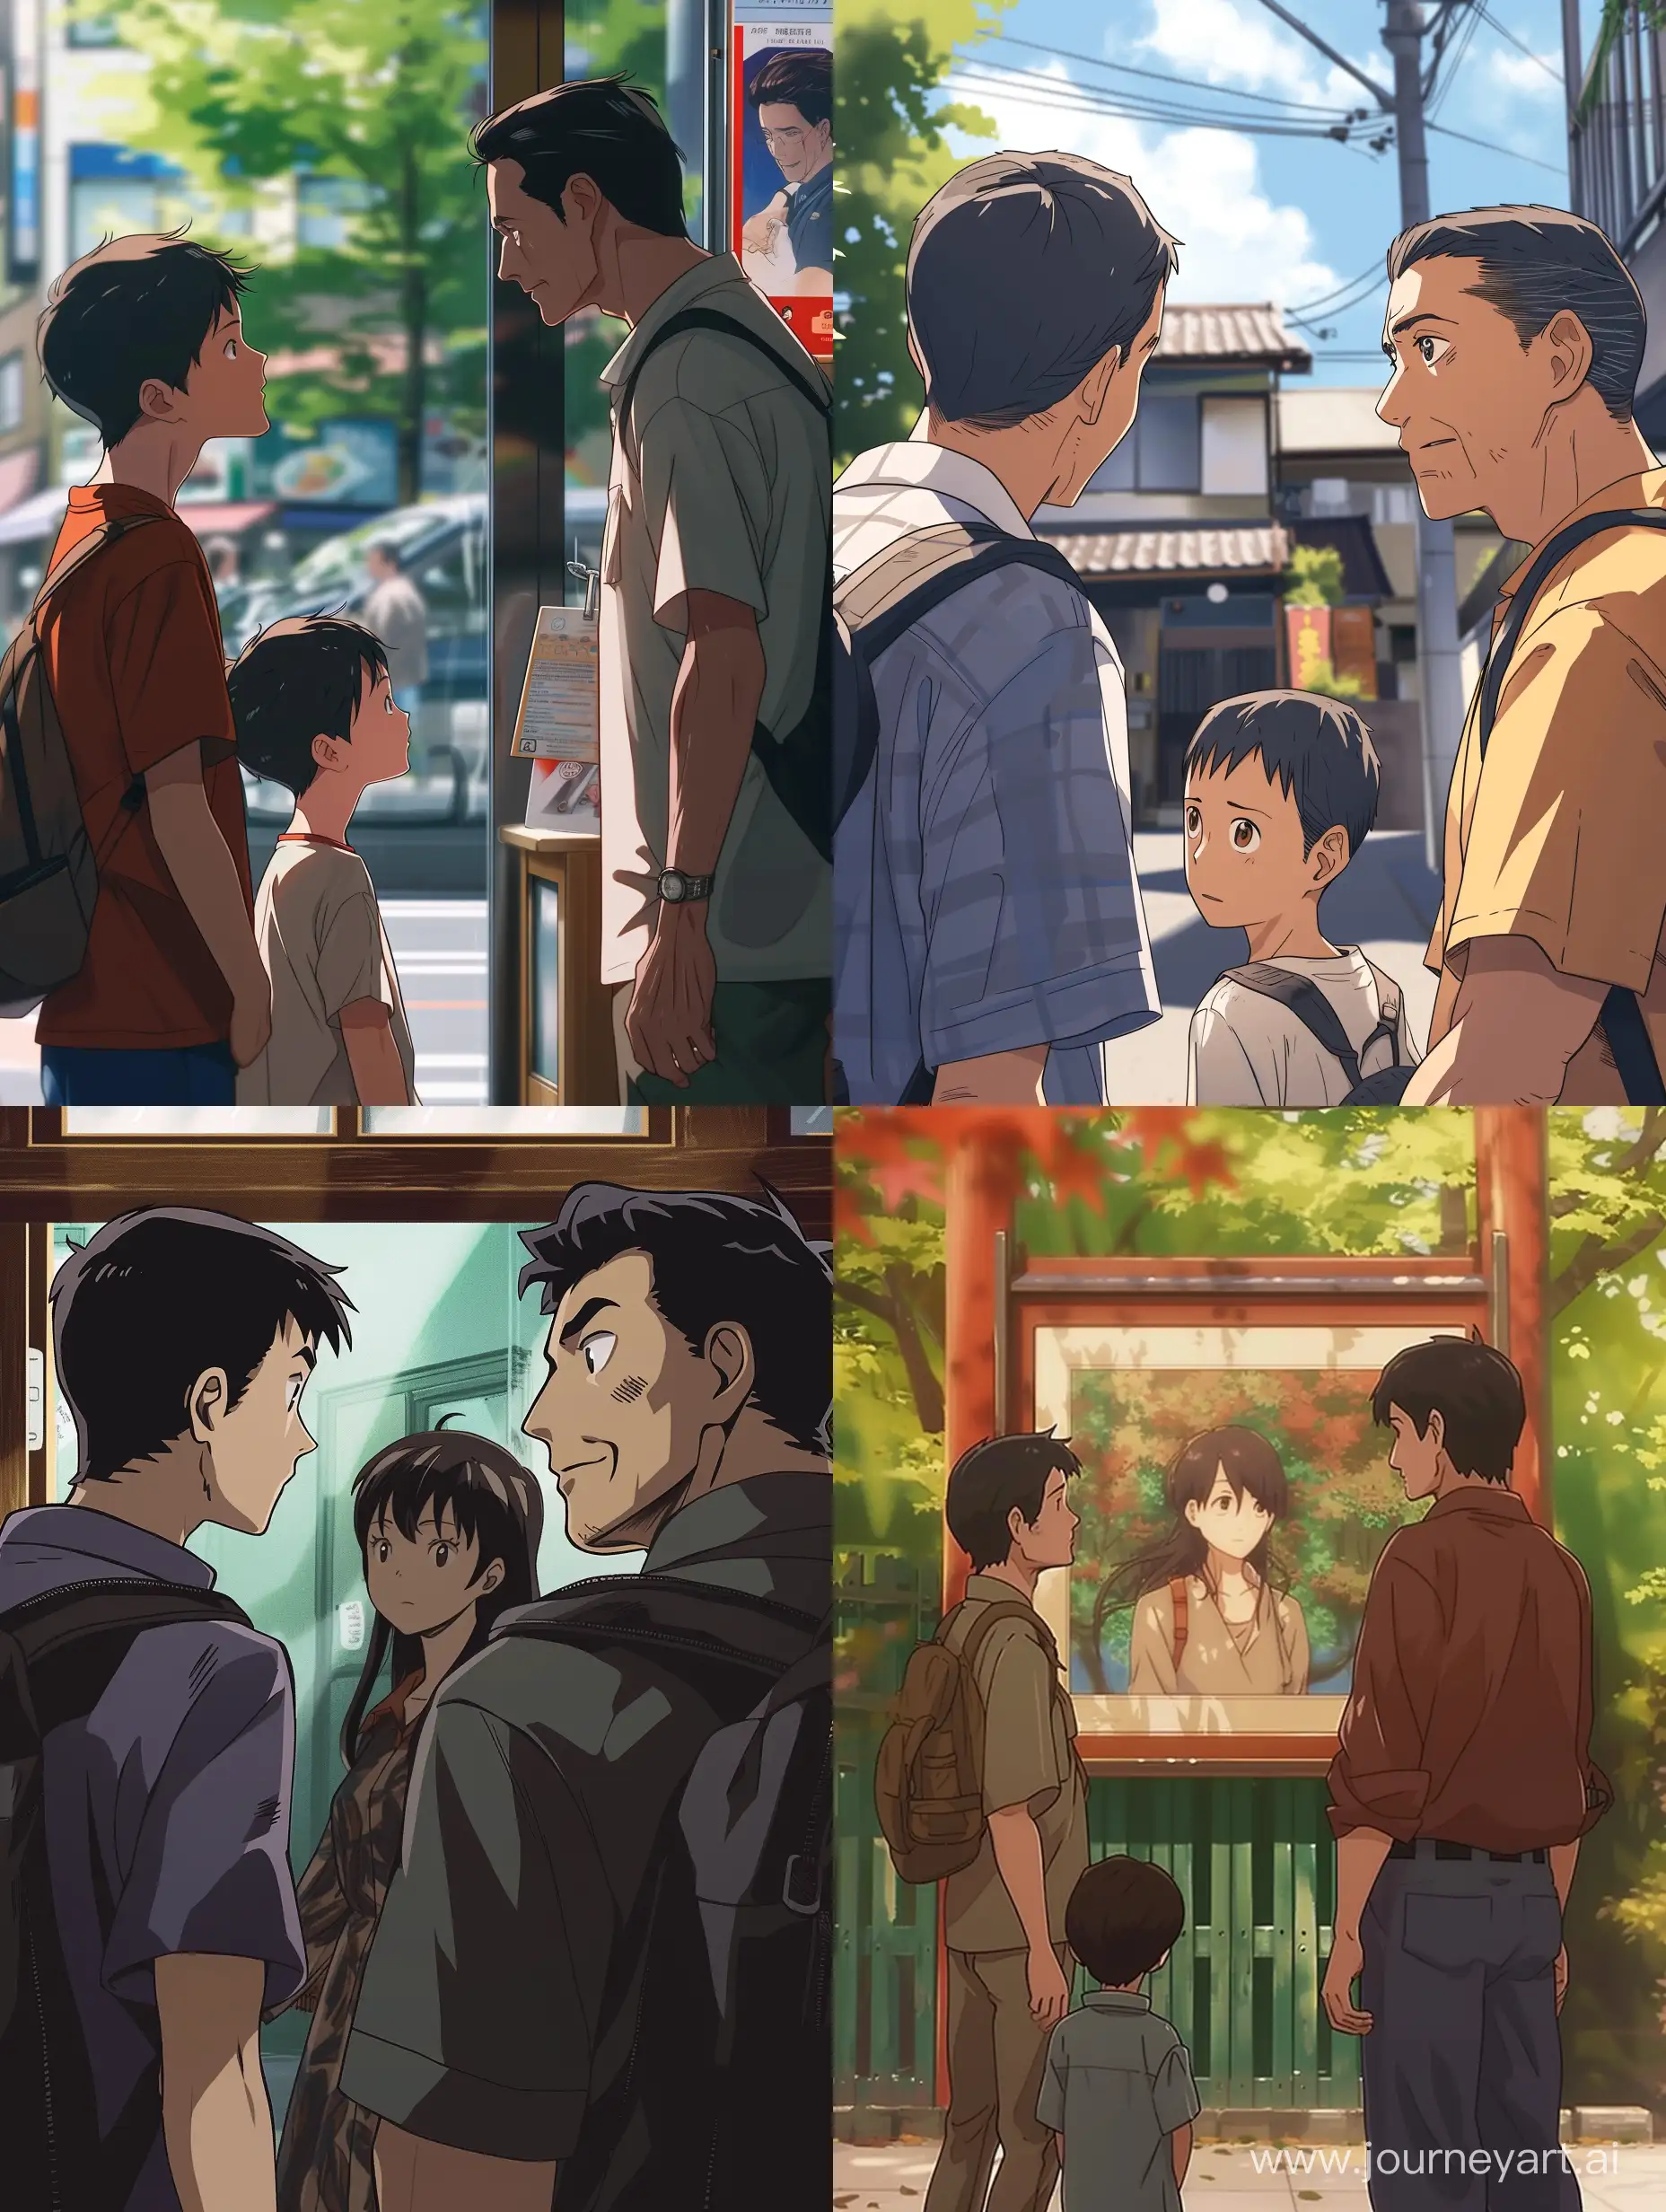 Father-and-Son-Admiring-Anime-Lady-Art